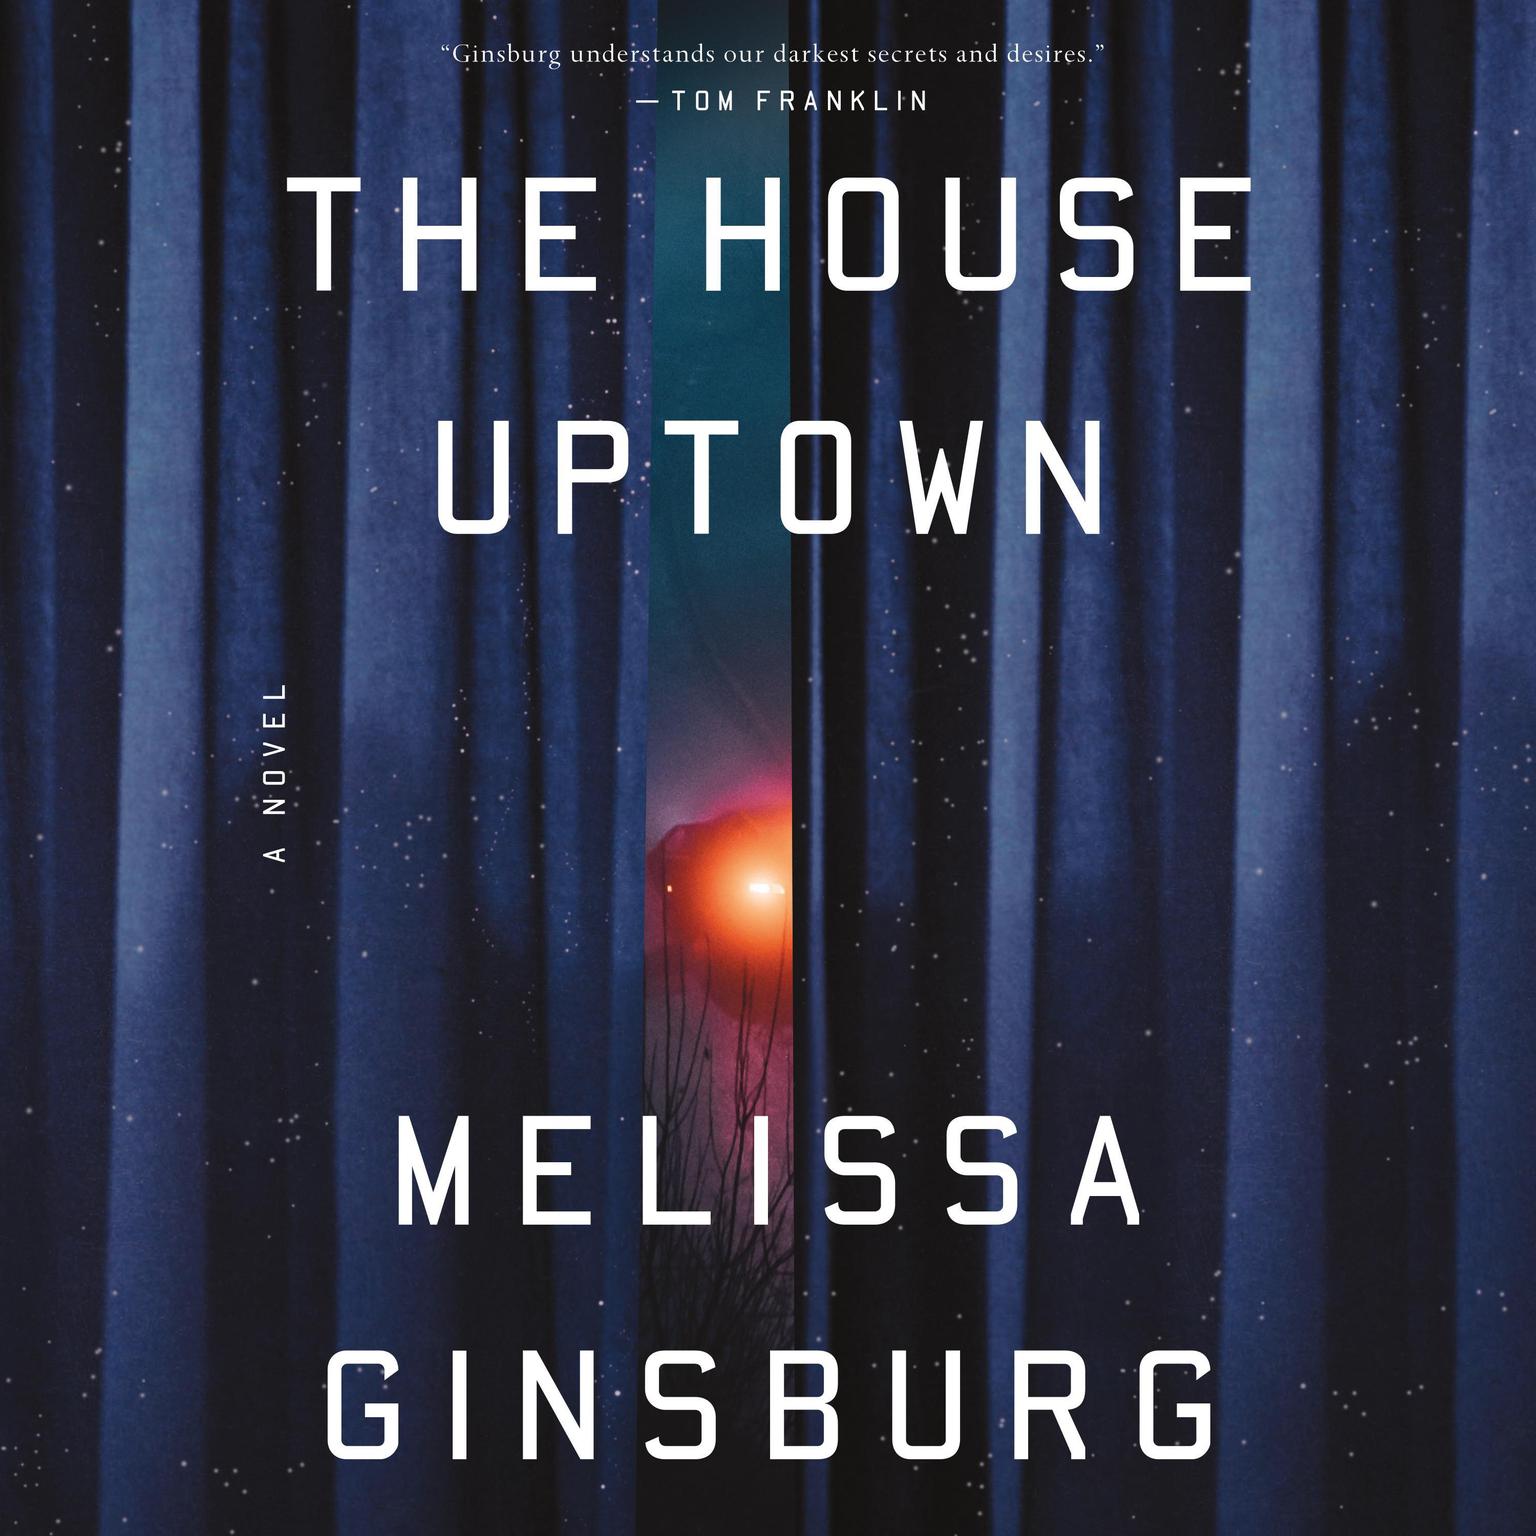 The House Uptown: A Novel Audiobook, by Melissa Ginsburg